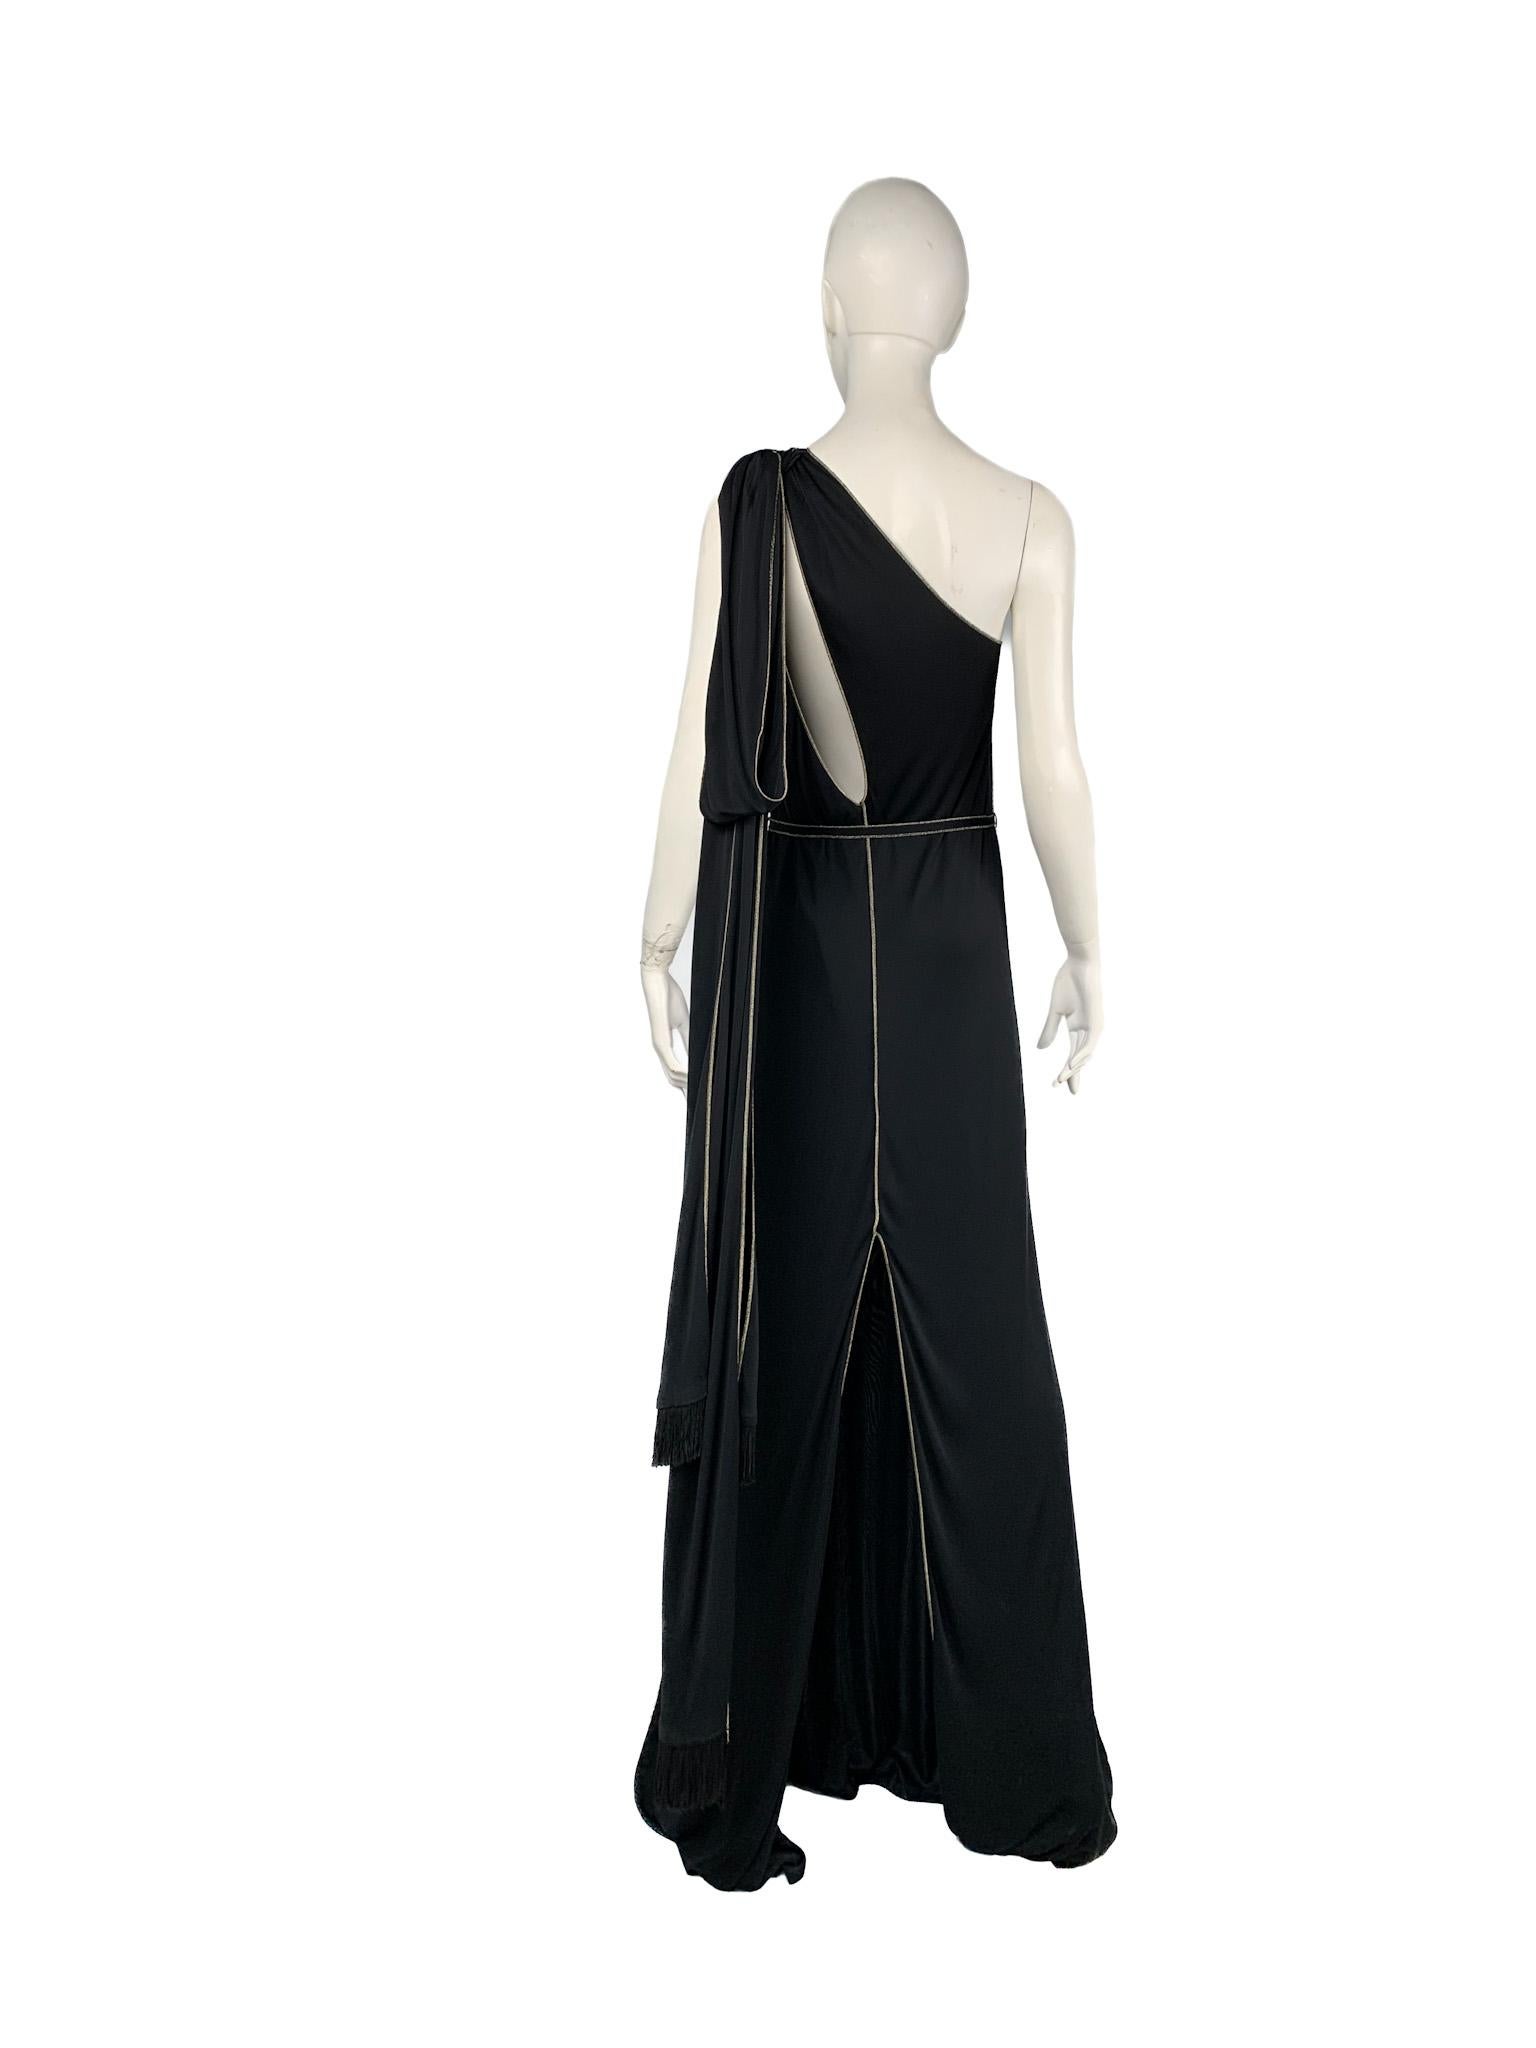 Gucci 2006 One-Shoulder Gown with Fringed Scarves/Train, Cutouts, Gold Topstitch 5